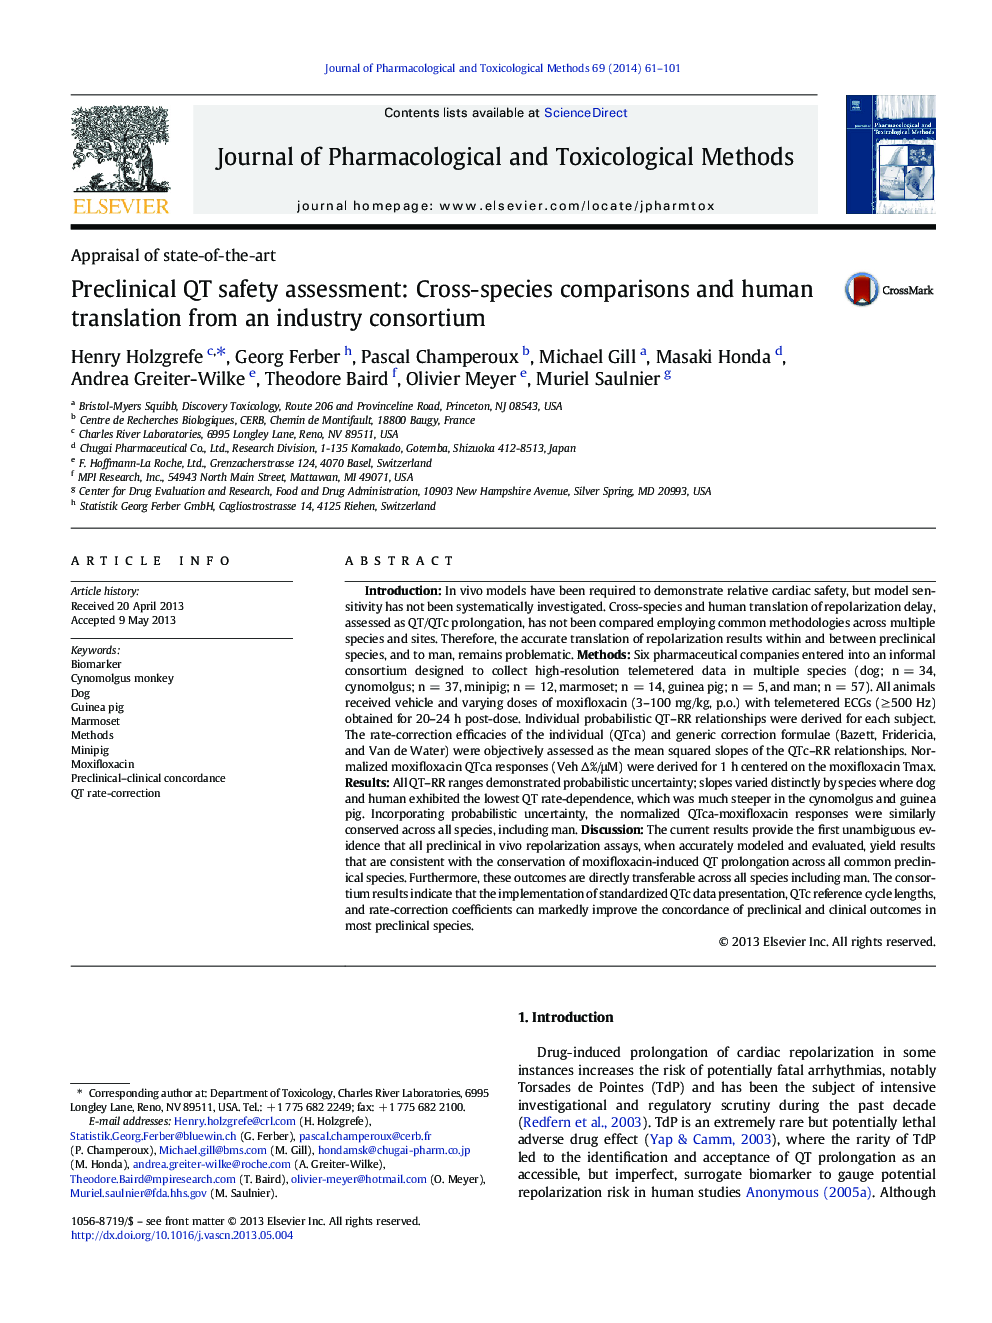 Appraisal of state-of-the-artPreclinical QT safety assessment: Cross-species comparisons and human translation from an industry consortium